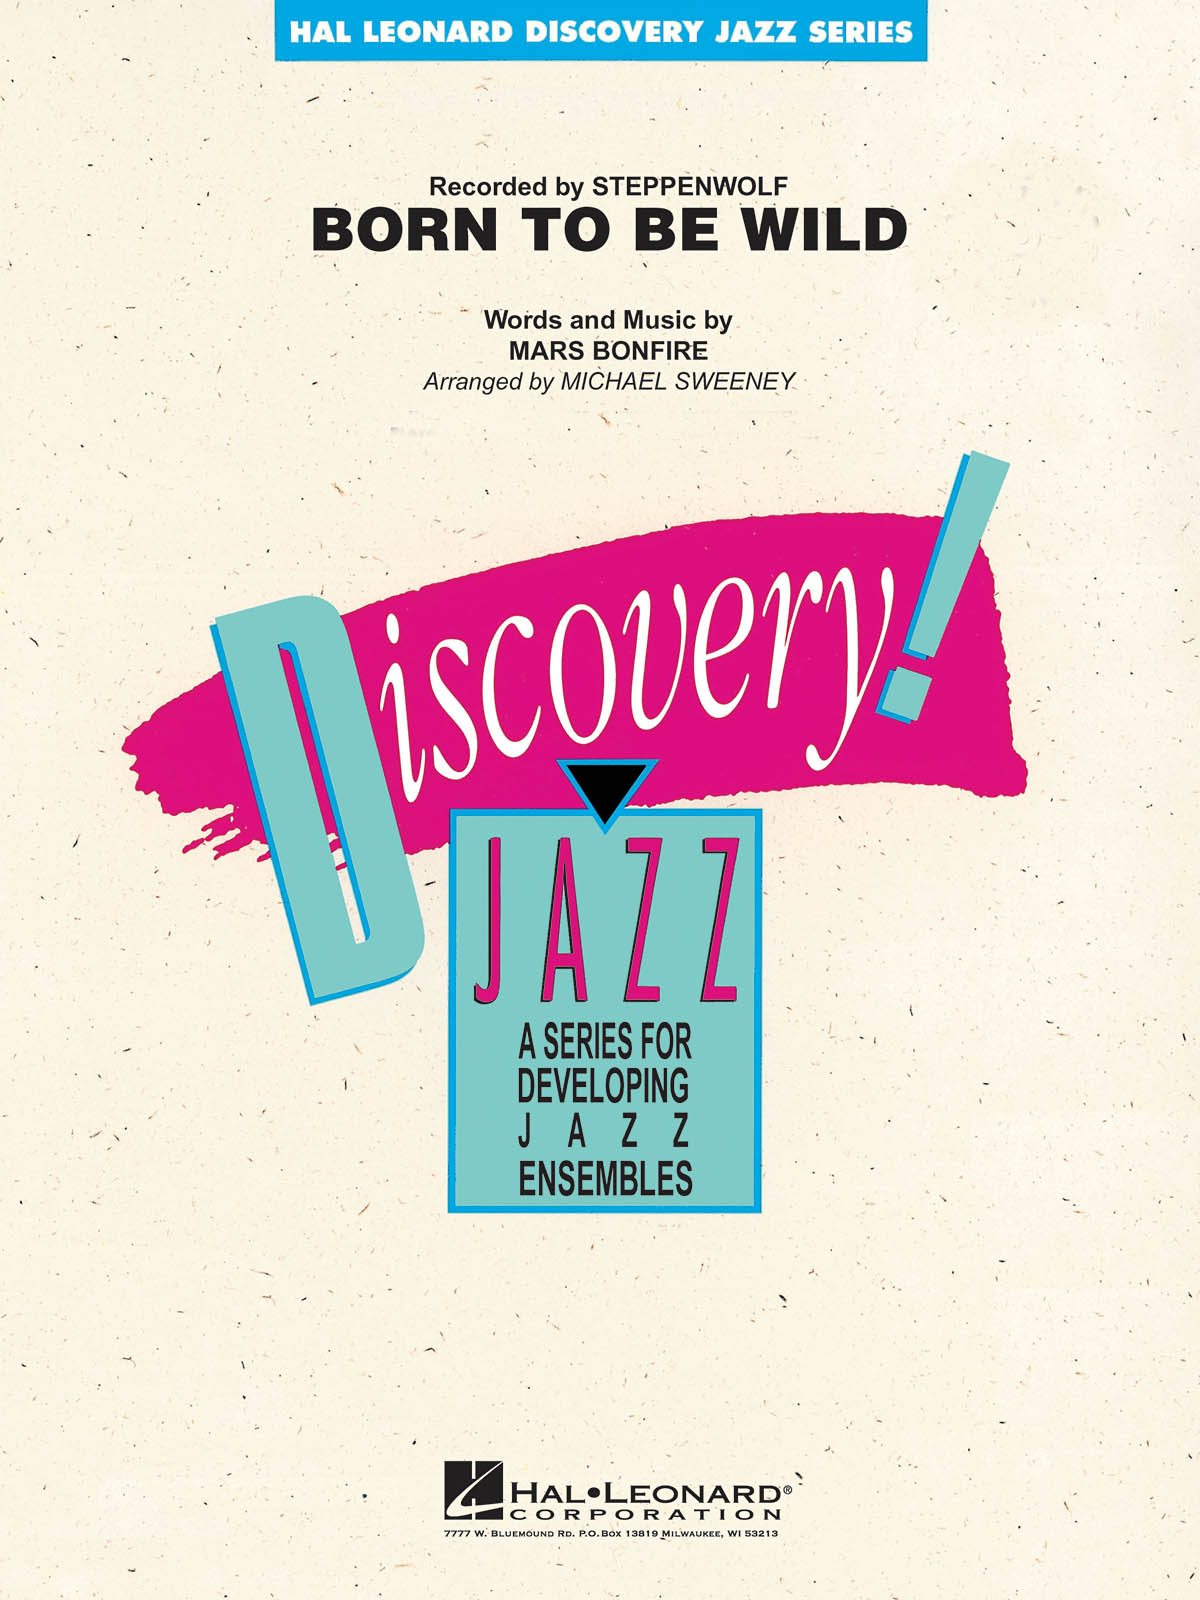 Born to be wild(Discovery Jazz Series)